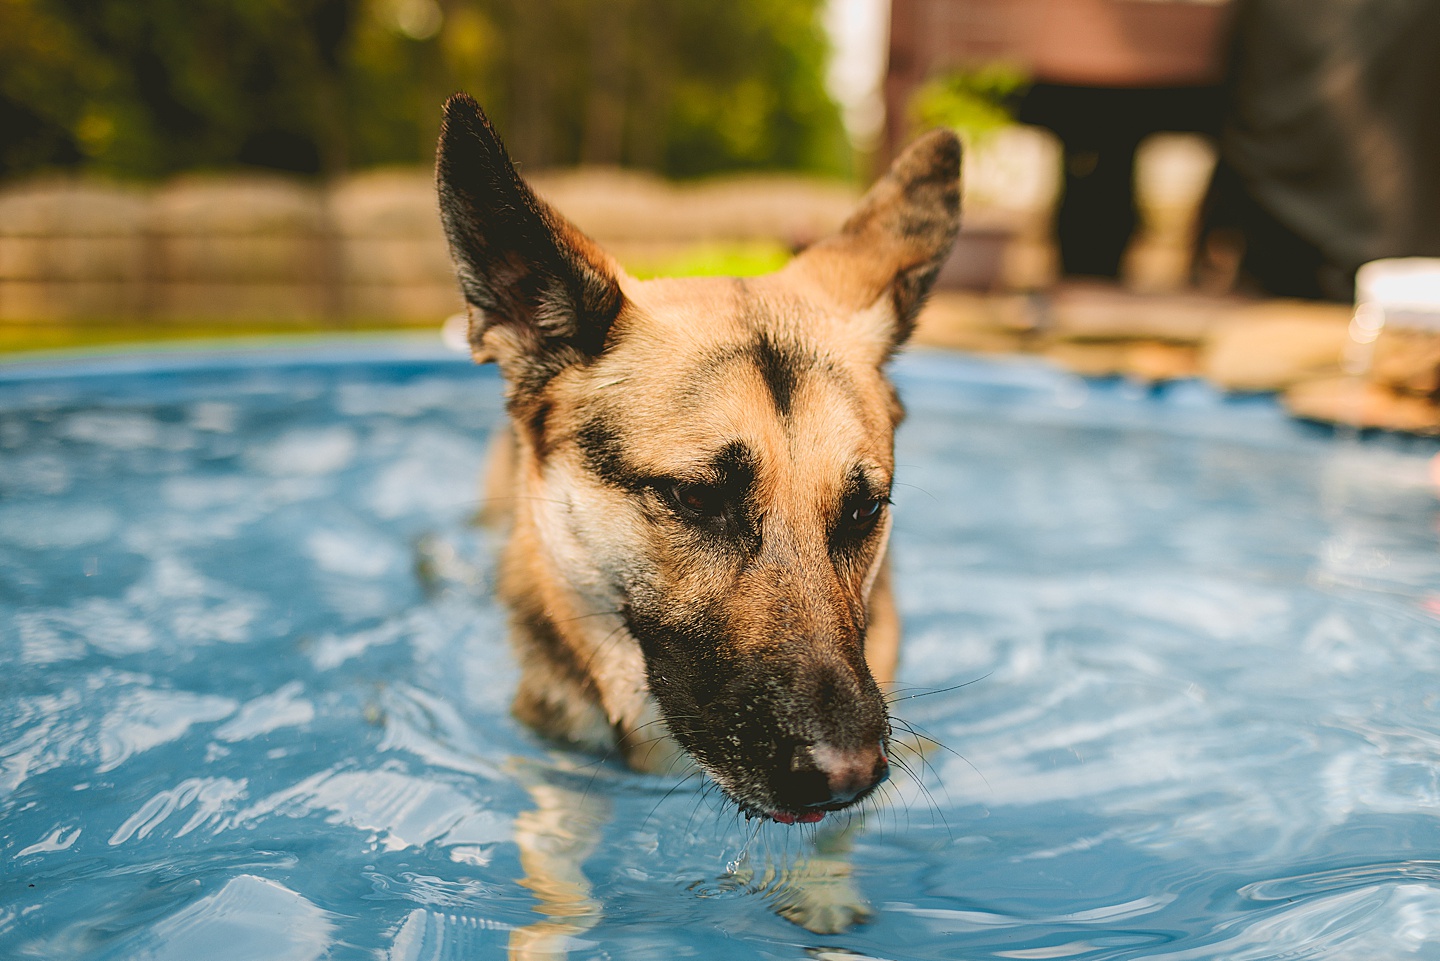 Dog playing in a pool with moms